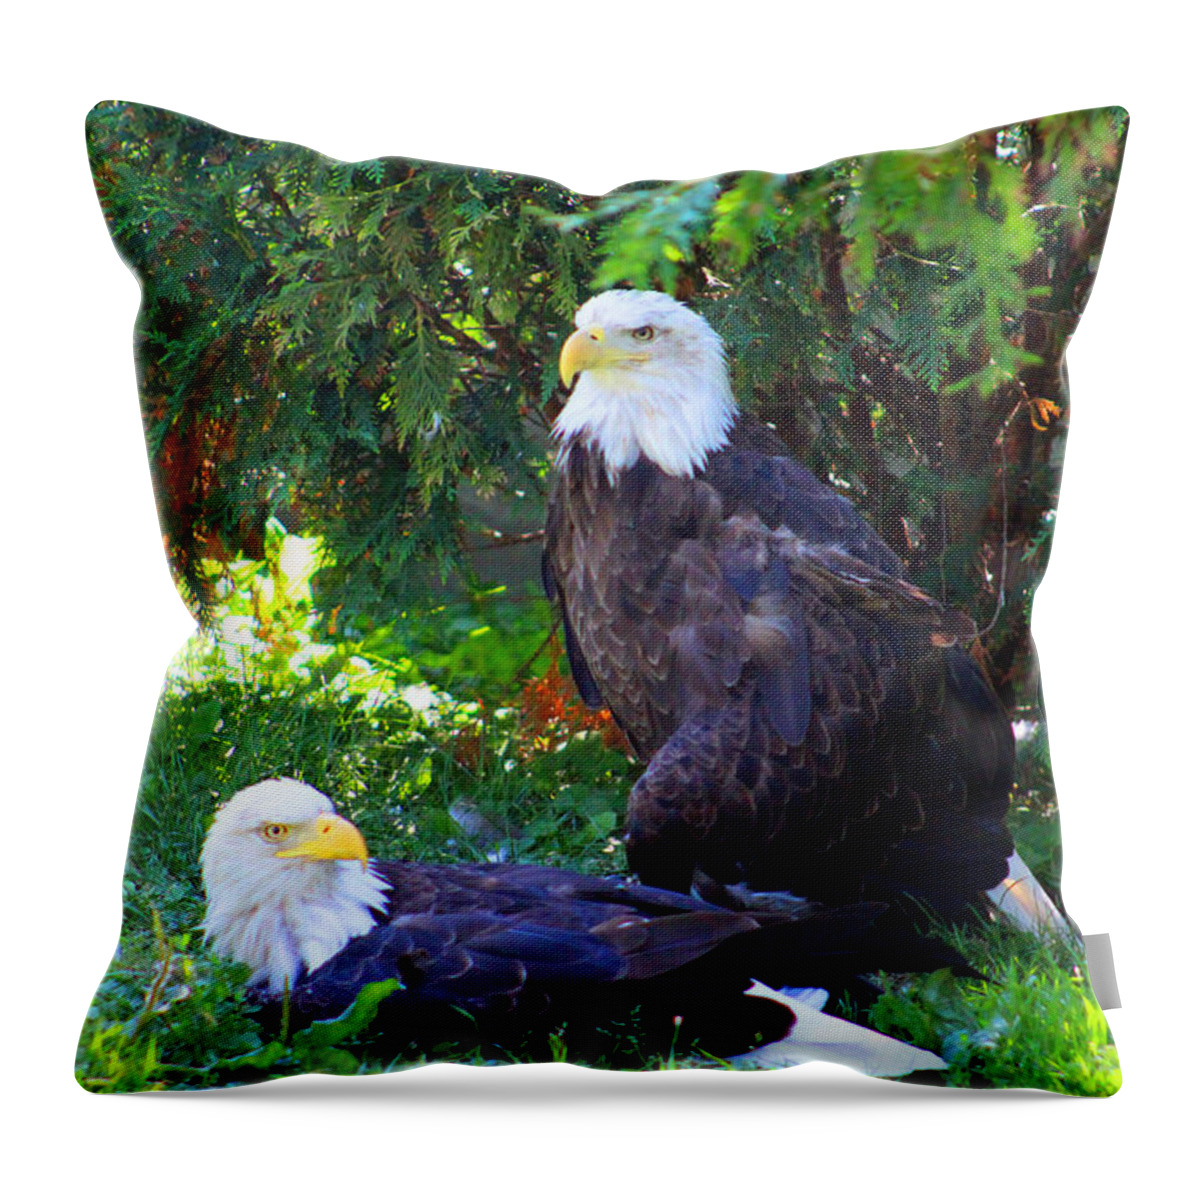 Eagle Throw Pillow featuring the photograph Bald Eagles by Michael Rucker